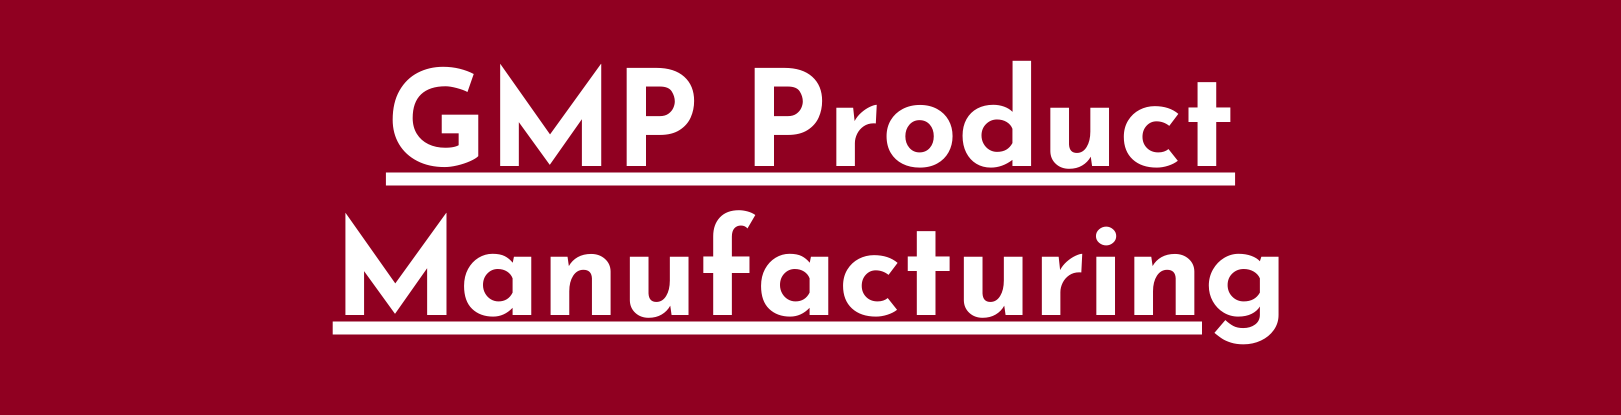 GMP Product Manufacturing